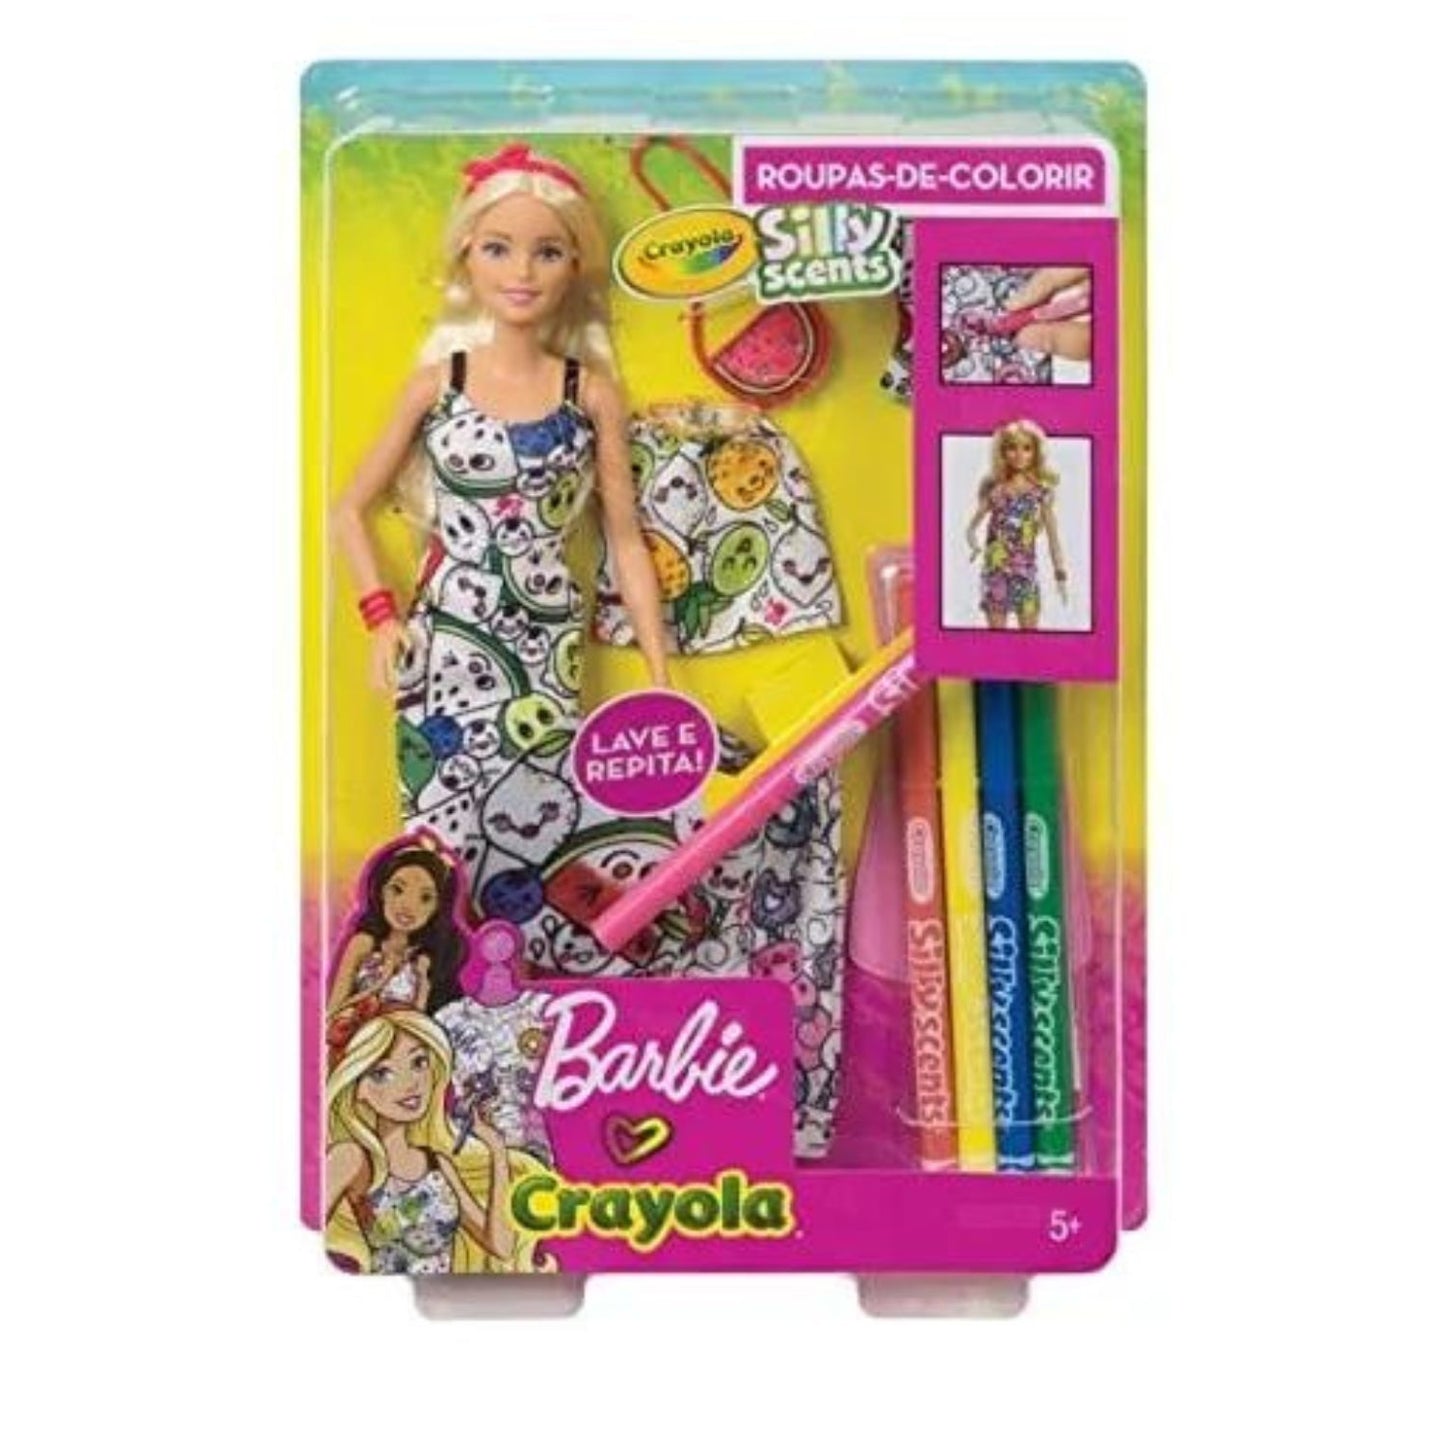 Barbie Crayola Color-in Fashions Doll (GGT44) - Unlock Your Child's Creativity by Coloring the Doll's Dress